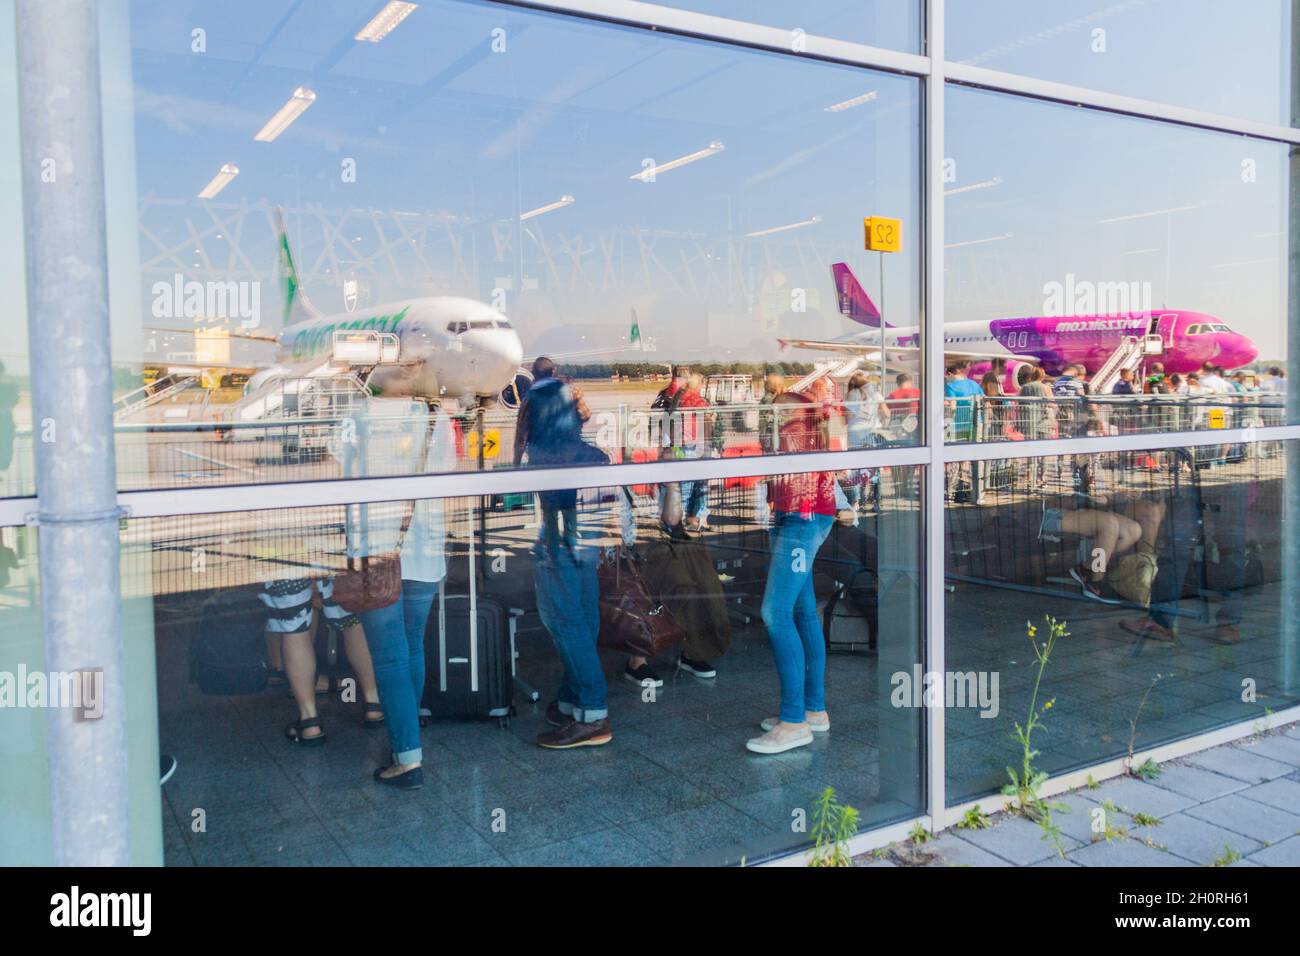 EINDHOVEN, NETHERLANDS - AUGUST 31, 2016: Reflections of airplanes at the terminal bulding of Eindhoven airport, Netherlands. Stock Photo